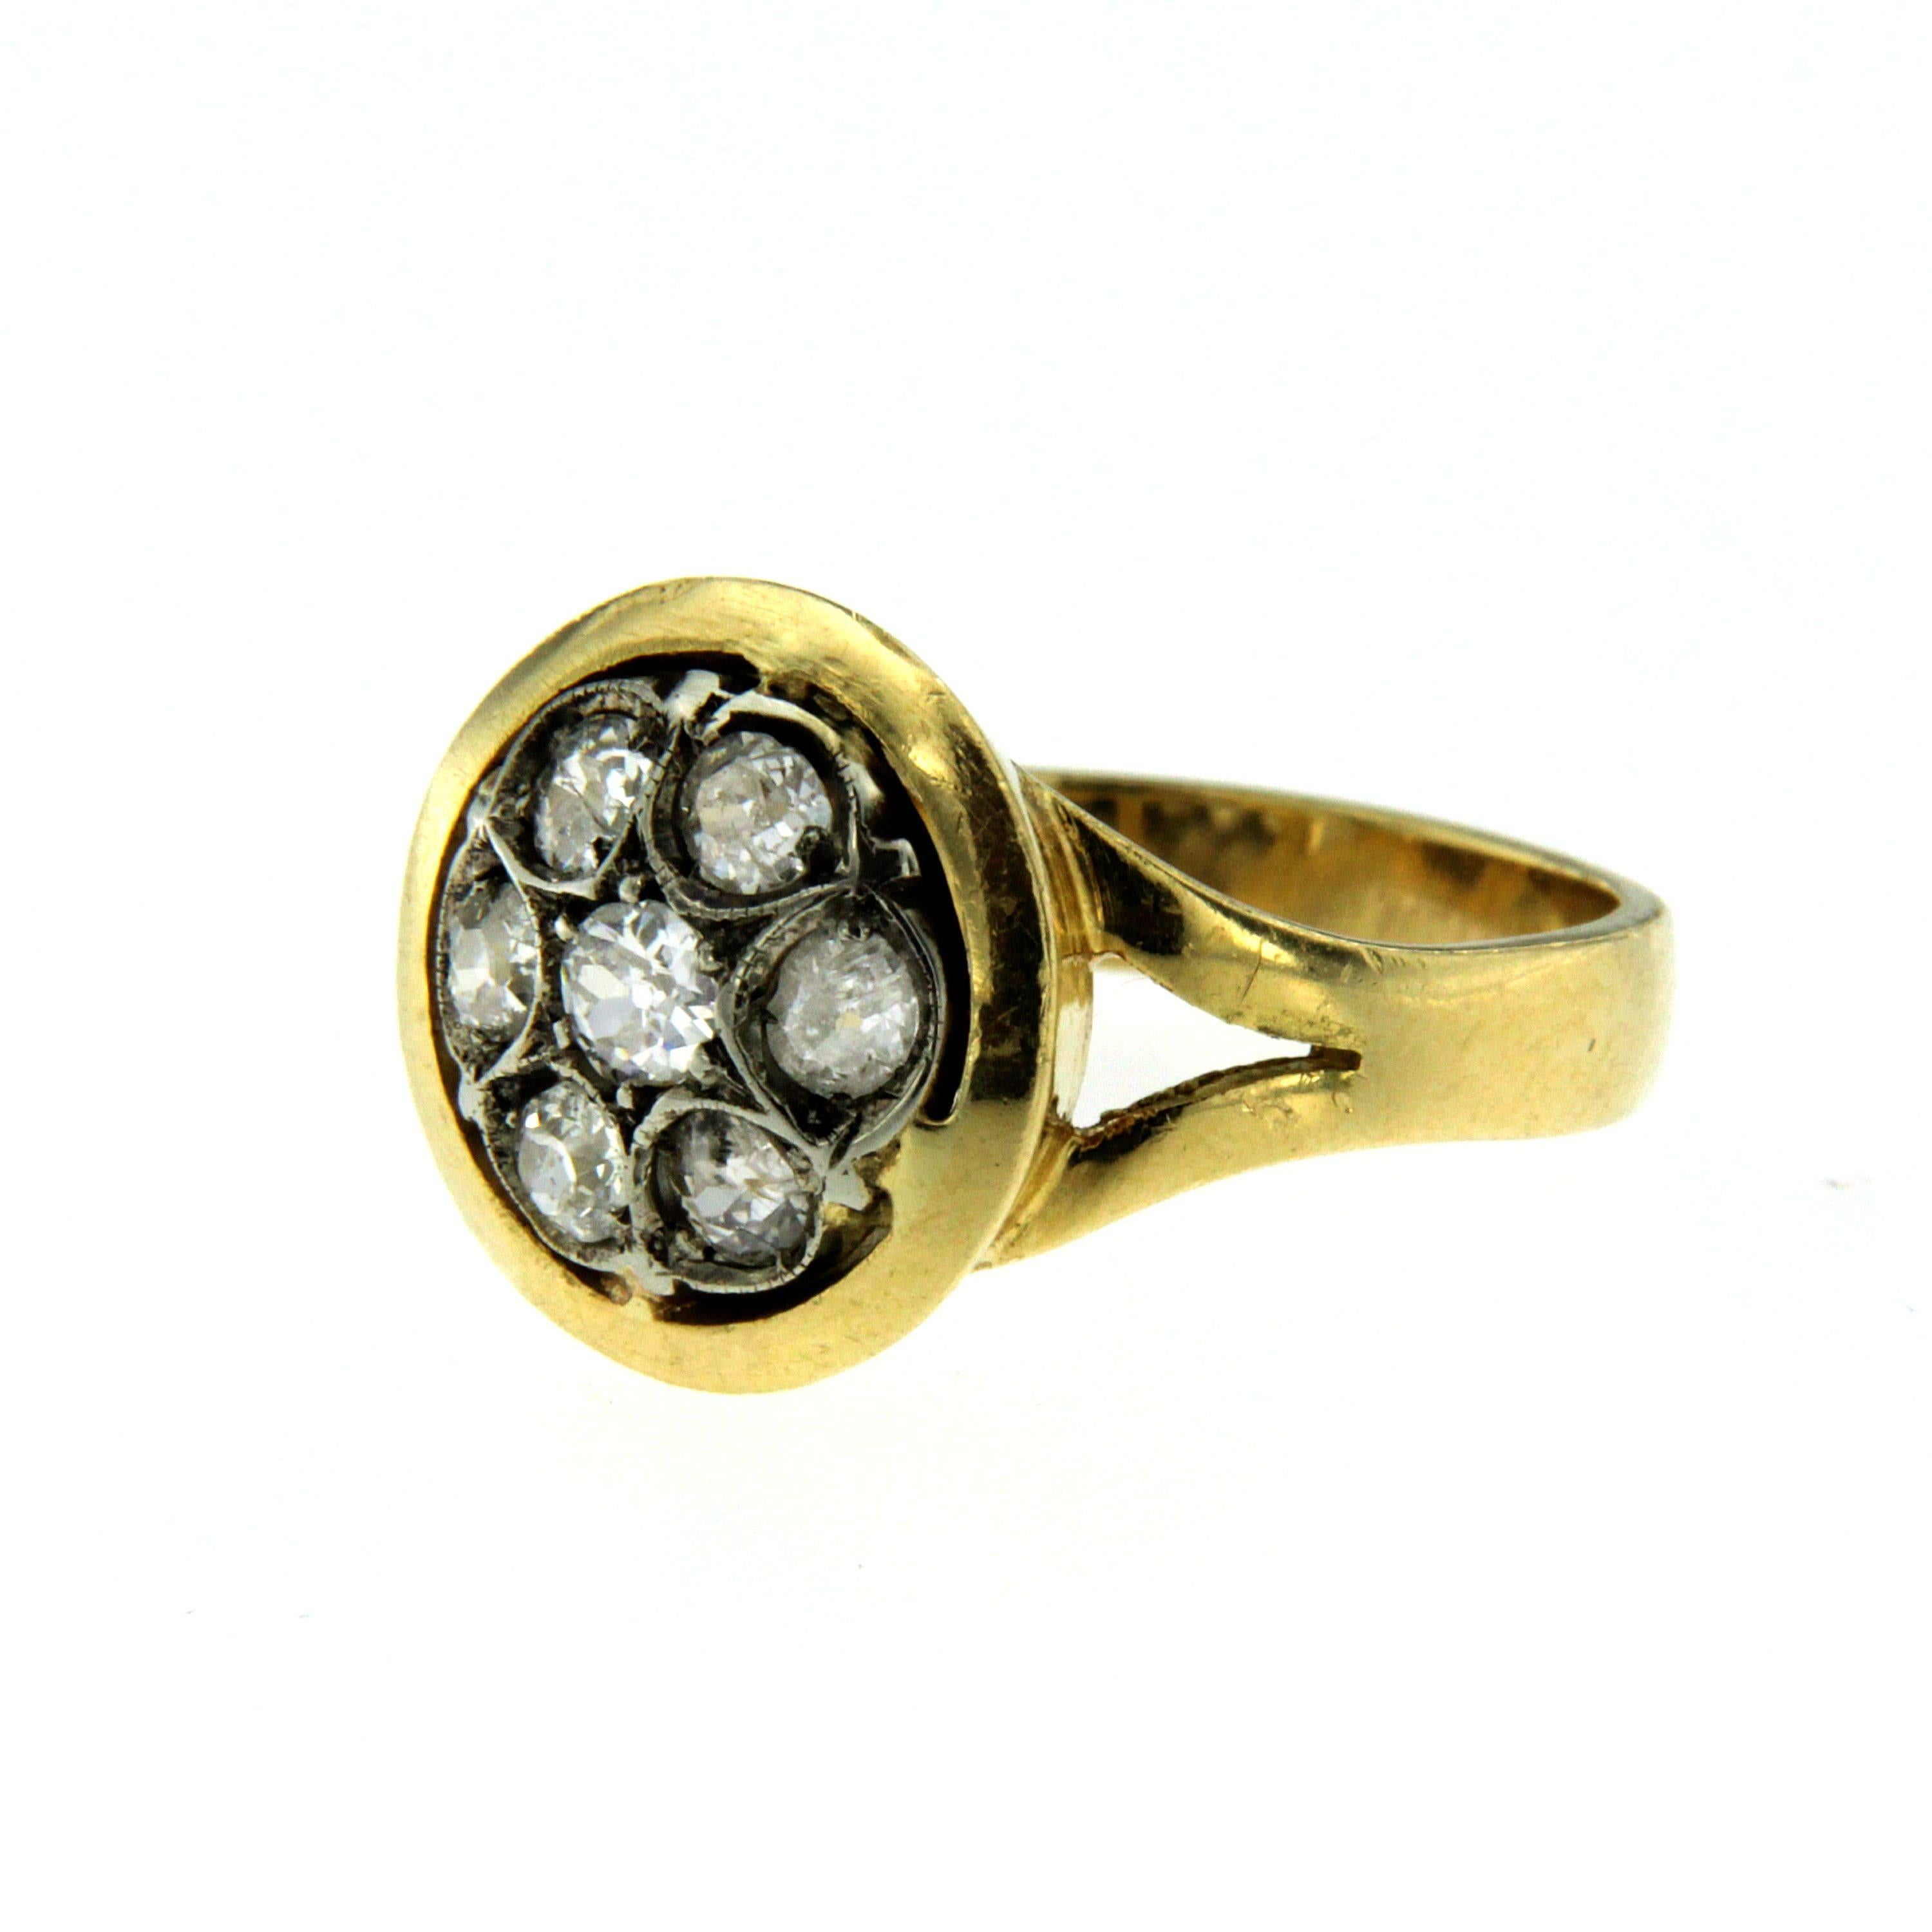 This 1890s antique diamond cluster ring is made in 18kt yellow gold and boasts a center Old-mine cut diamond encircled by a further six antique Old-mine cut diamonds weighing an approx. total of 1ct, I color vs2.
Origin Italy

Gross Weight: 5.5